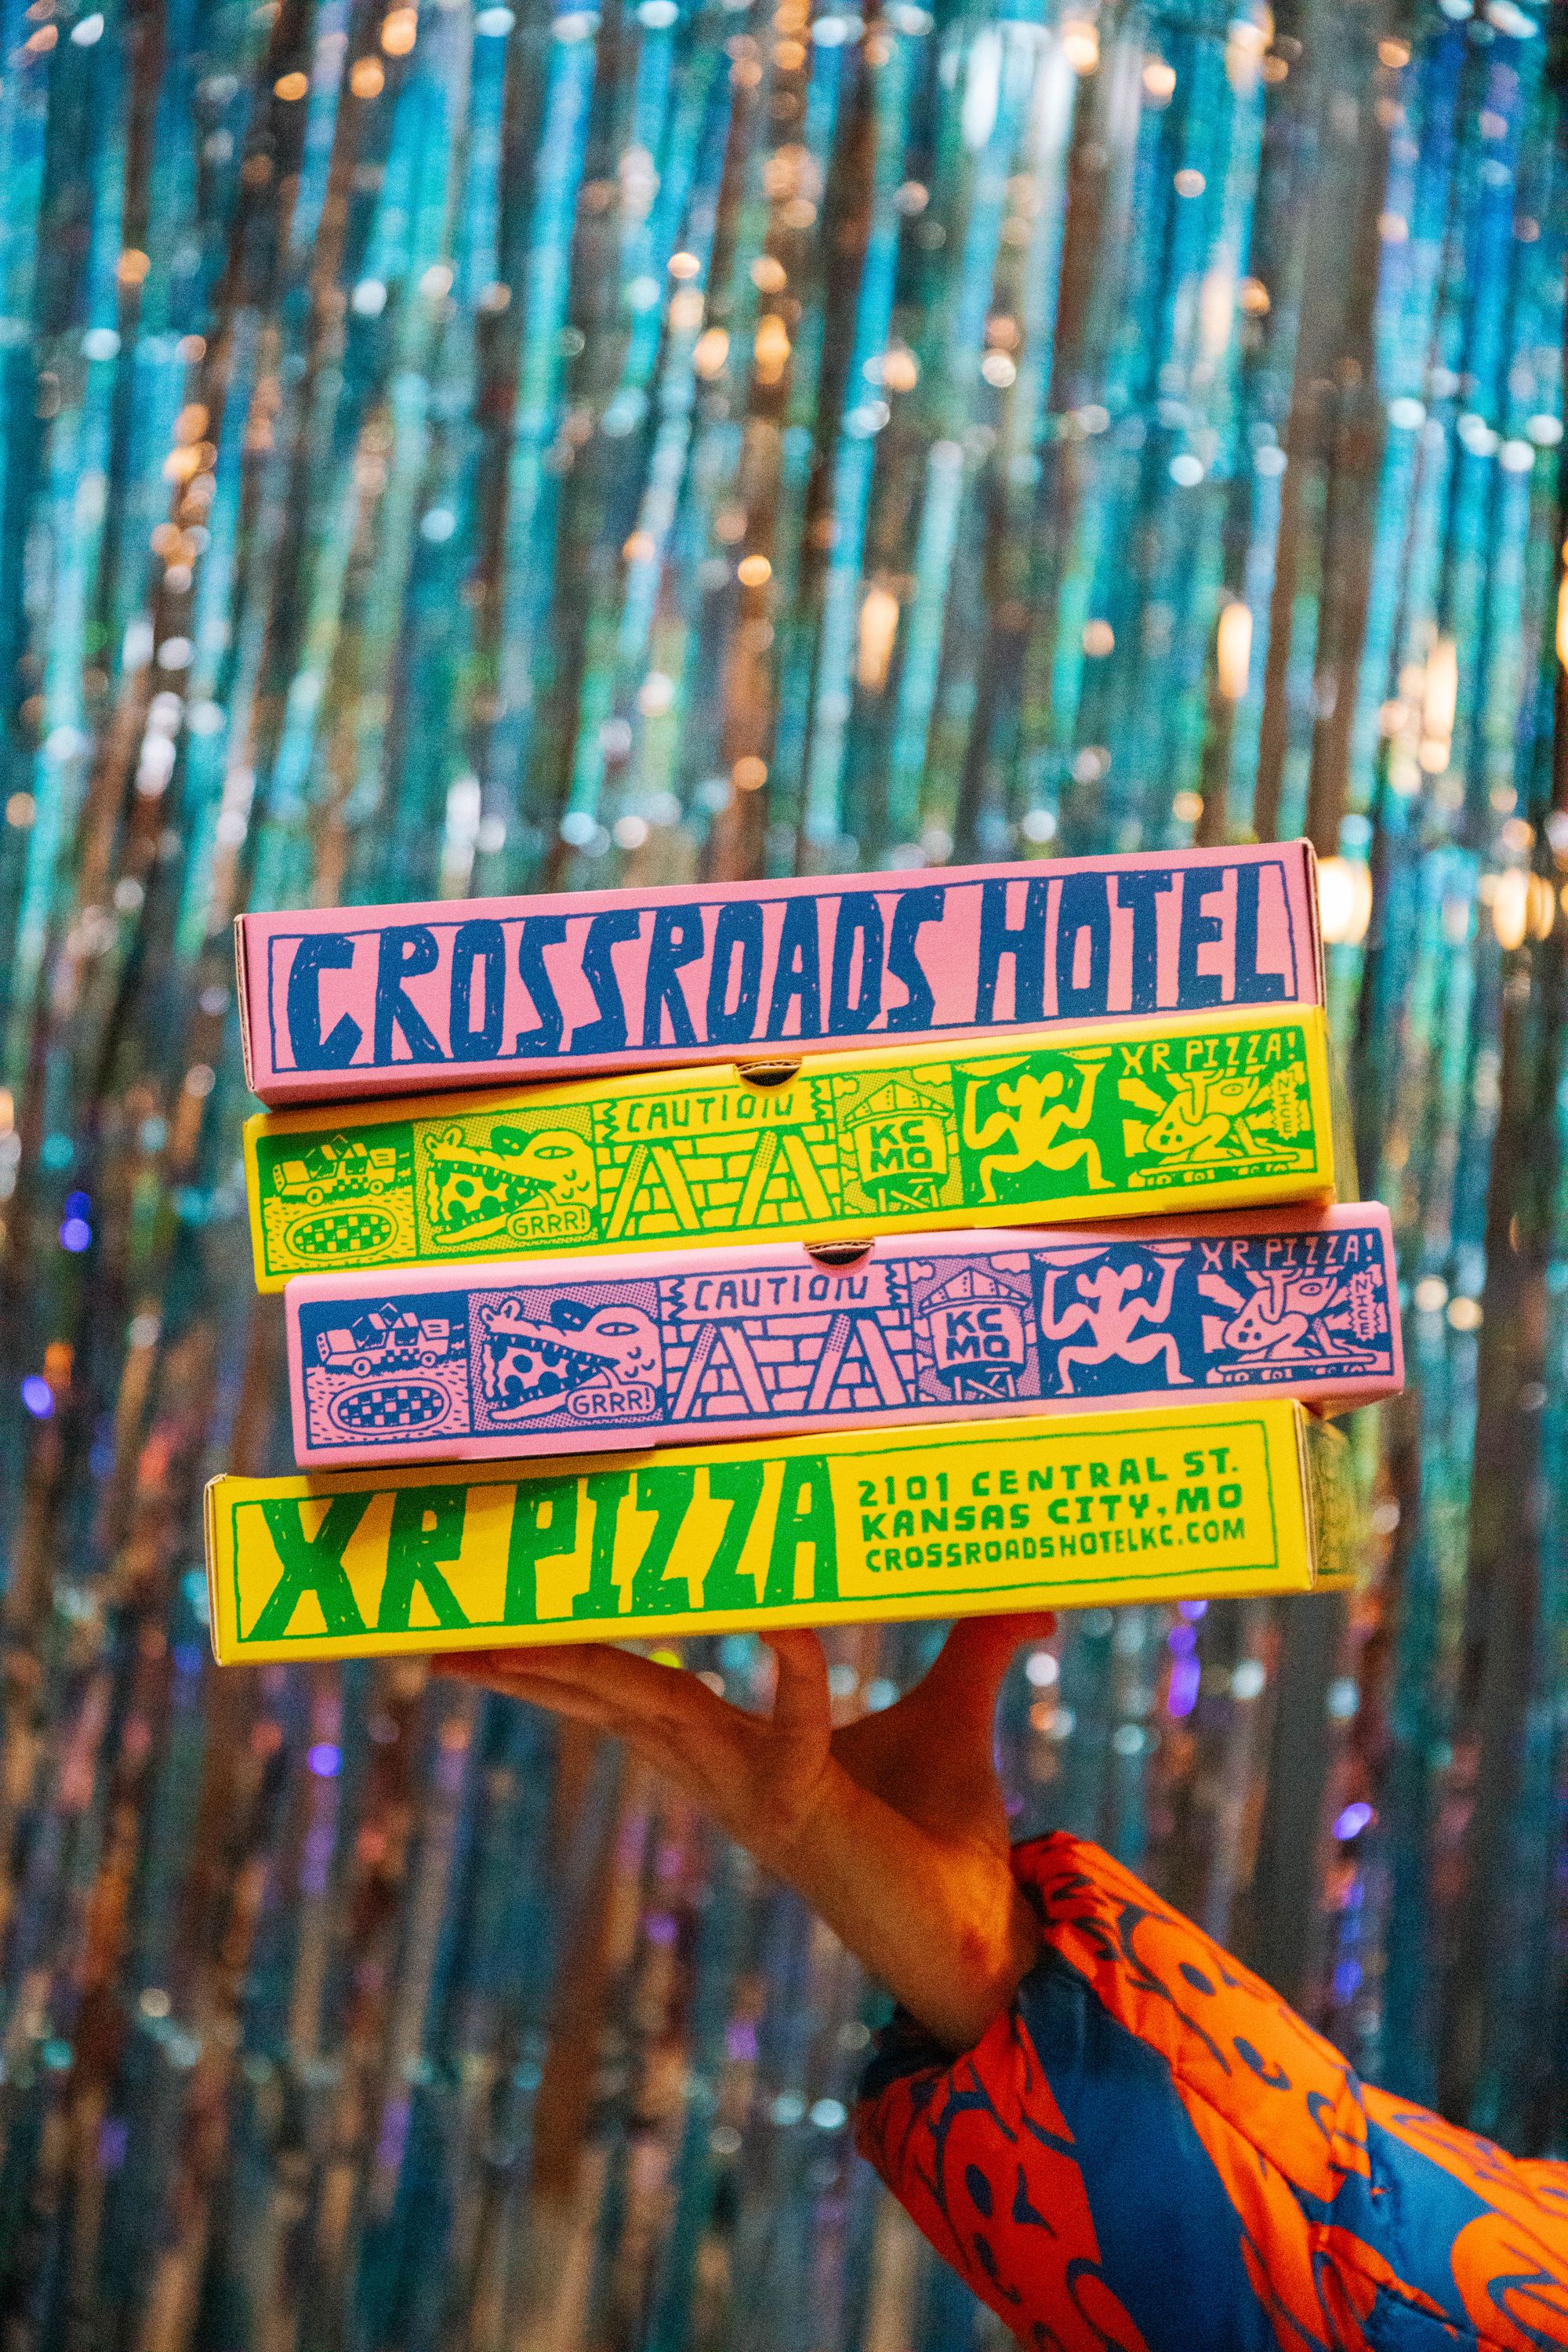 XR at Crossroads Hotel x noissue